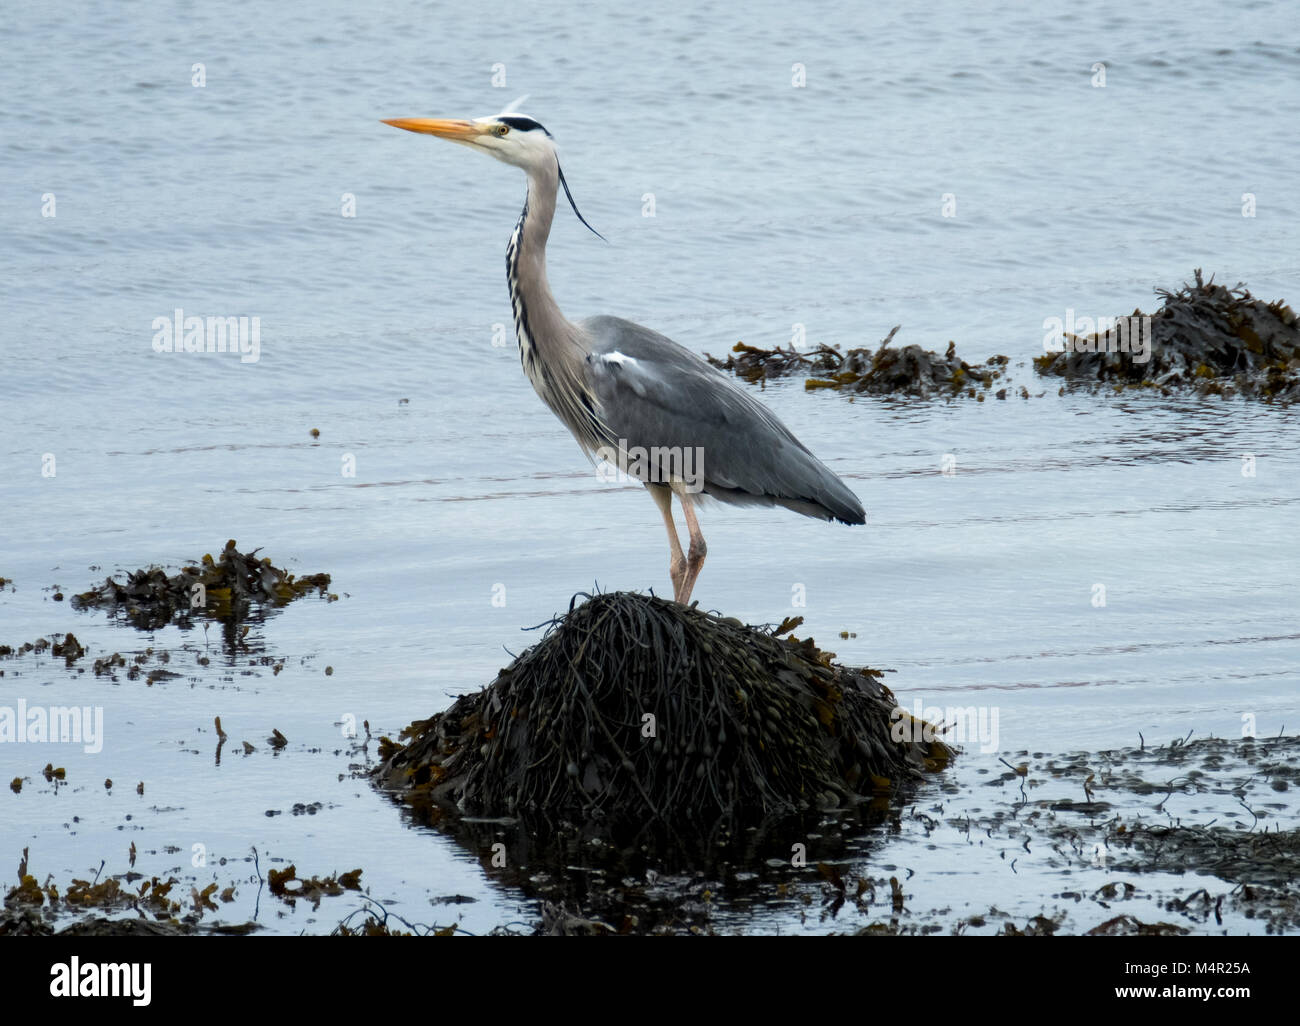 Grey Heron (Ardea cinerea) adult wading in shallow water. Loch na Keal, Island of Mull, Scotland. Stock Photo